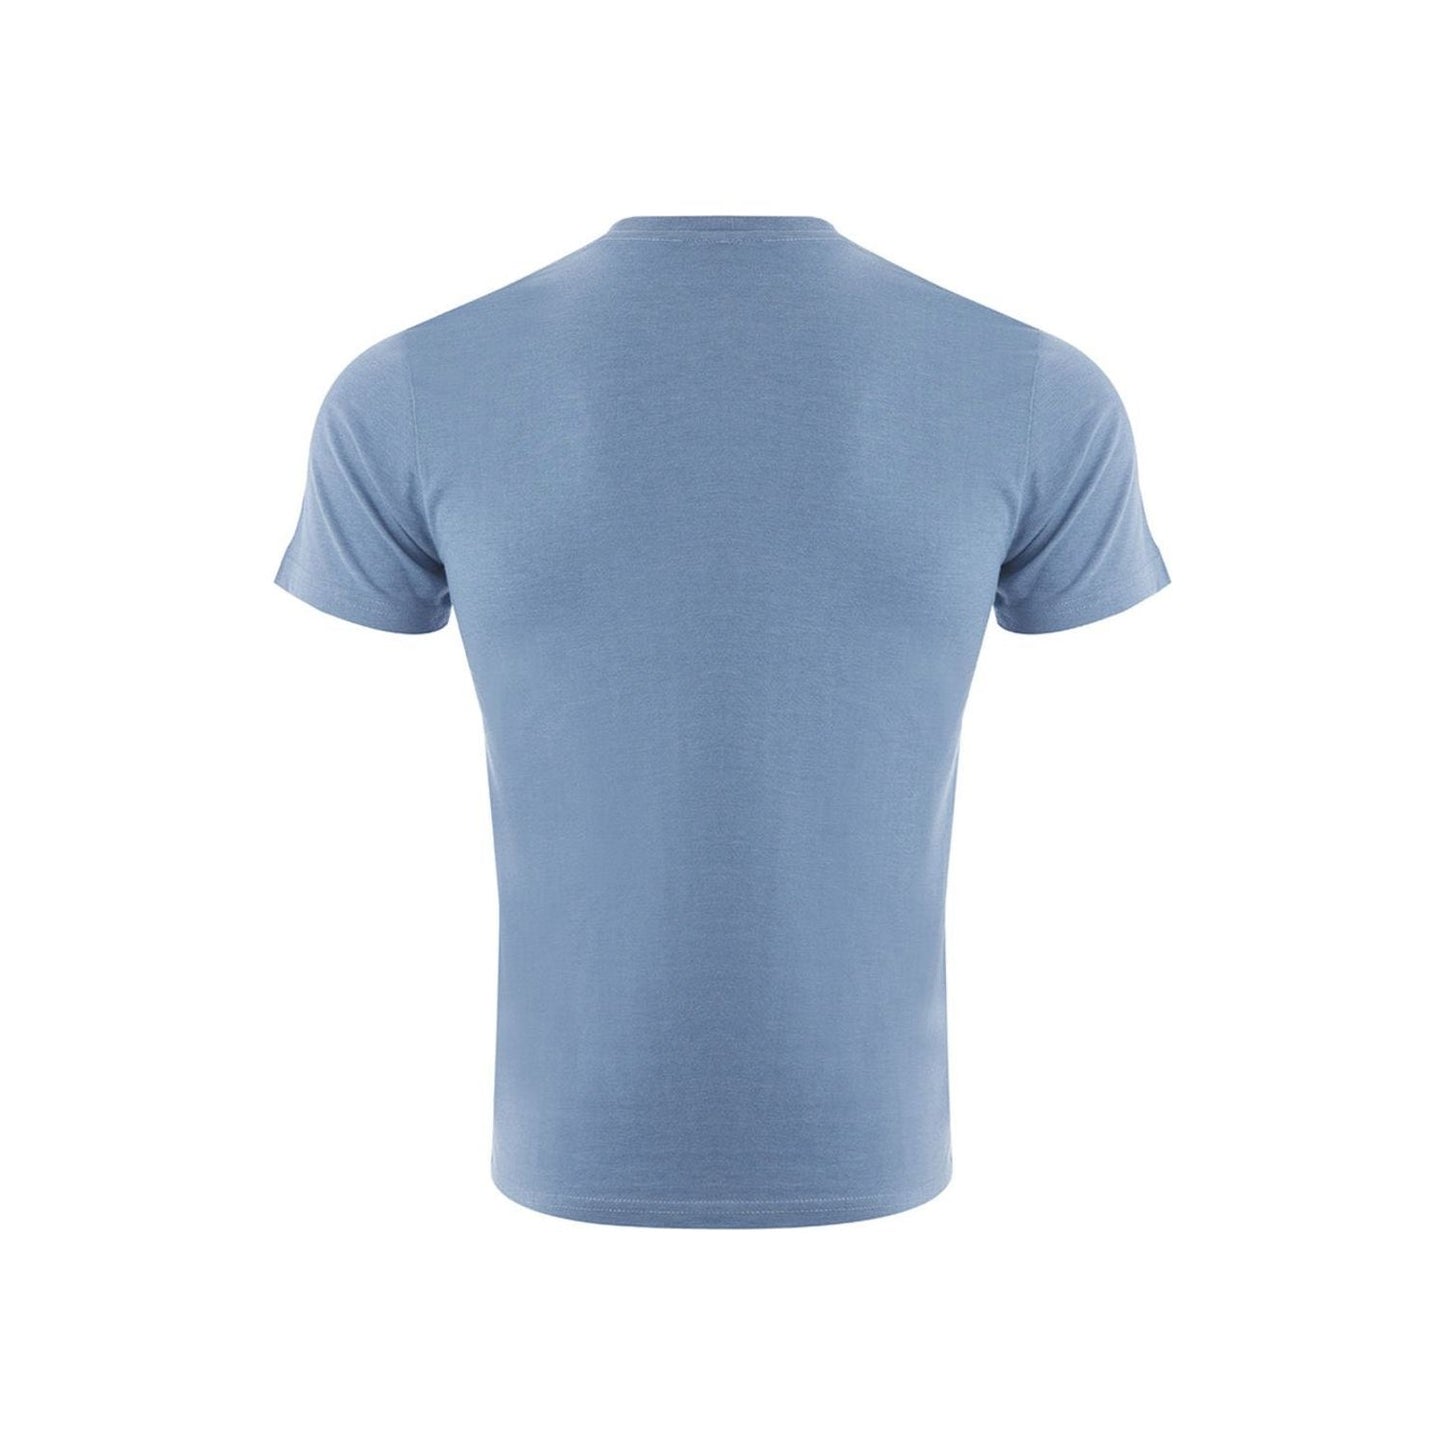 Kenzo | Blue Cotton T-Shirt with Tiger Print and Front Logo - McRichard Designer Brands